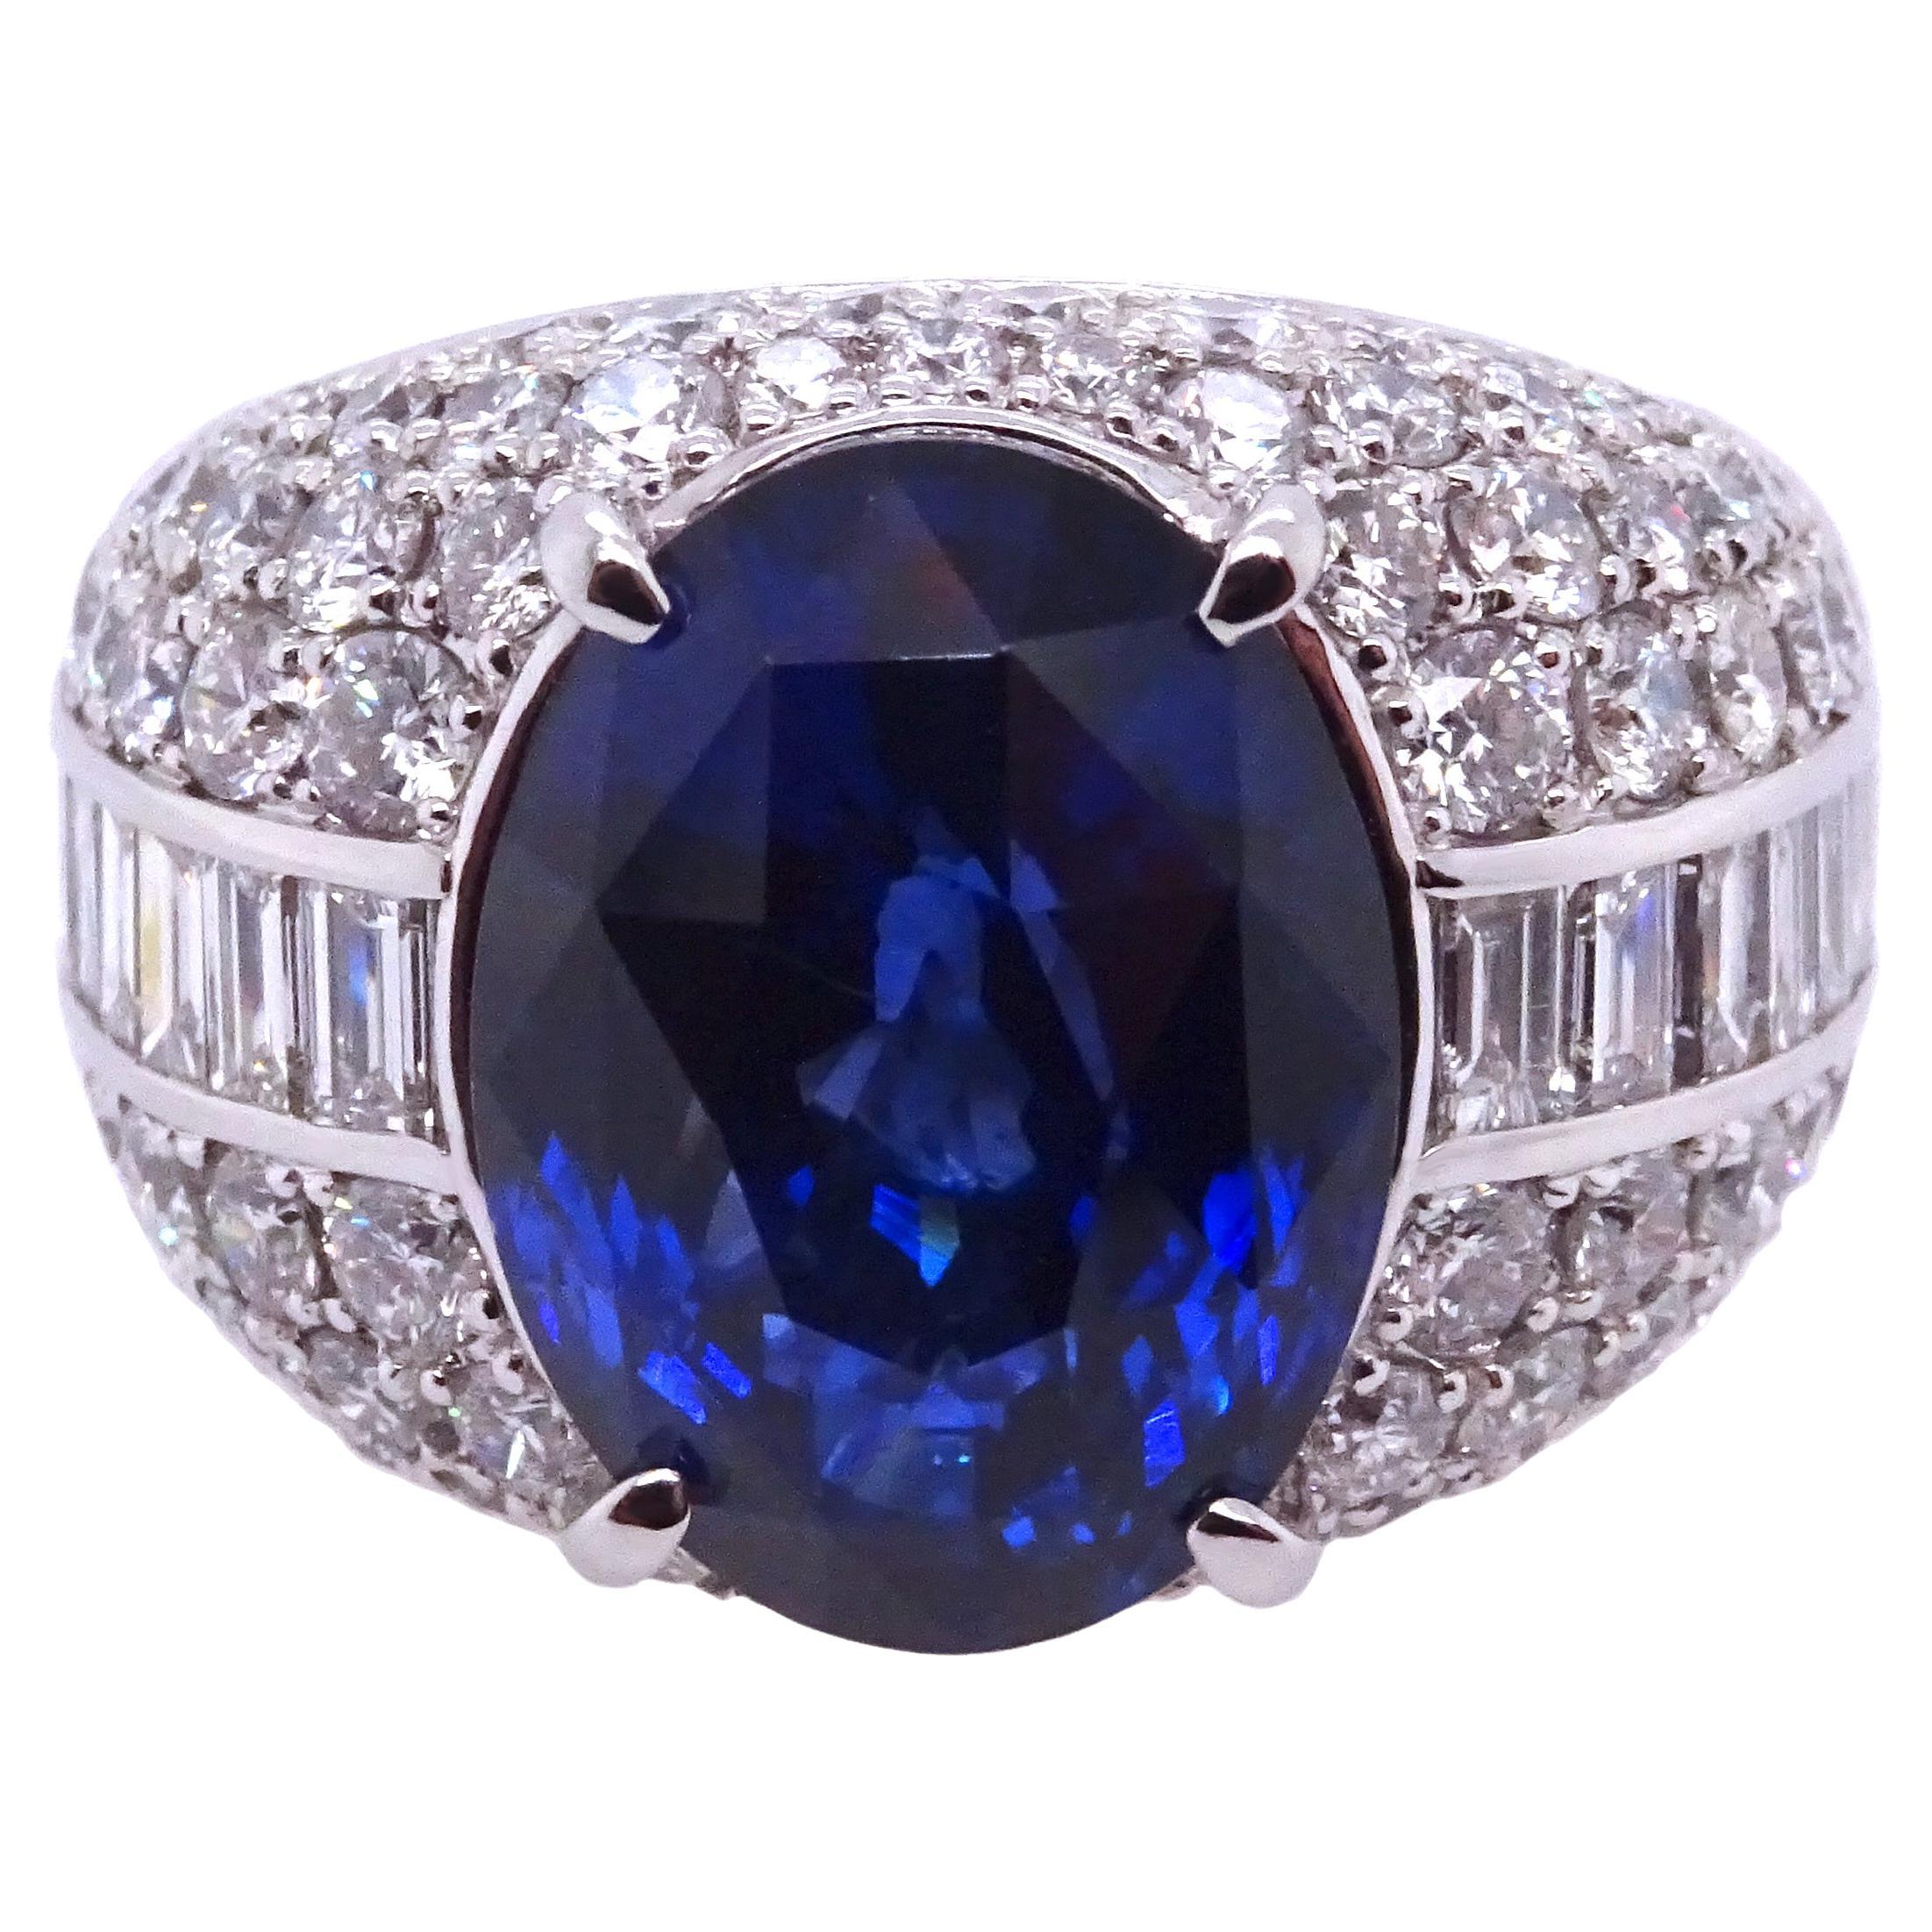 Platinum 900 Ring with Round and Baguette Diamonds and Royal Blue Sapphire